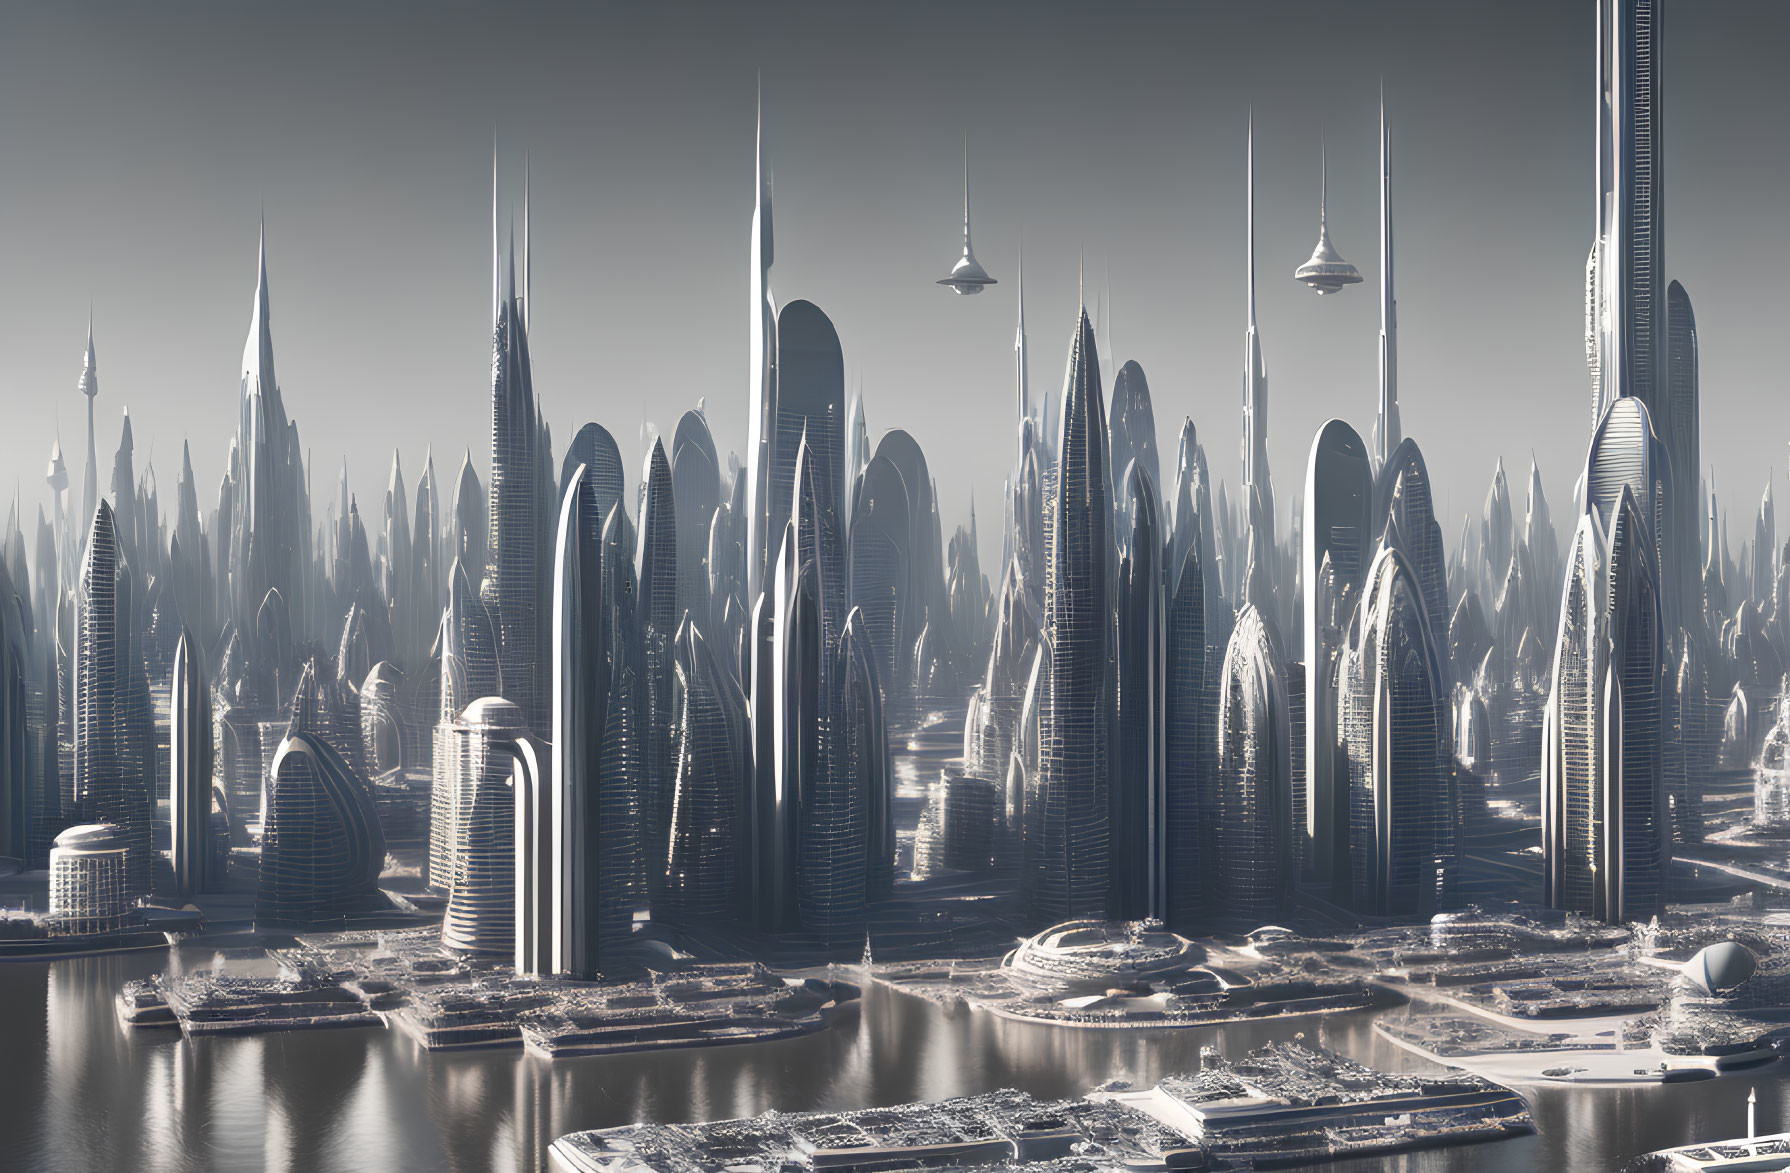 Sleek skyscrapers and airships in futuristic cityscape by the waterfront